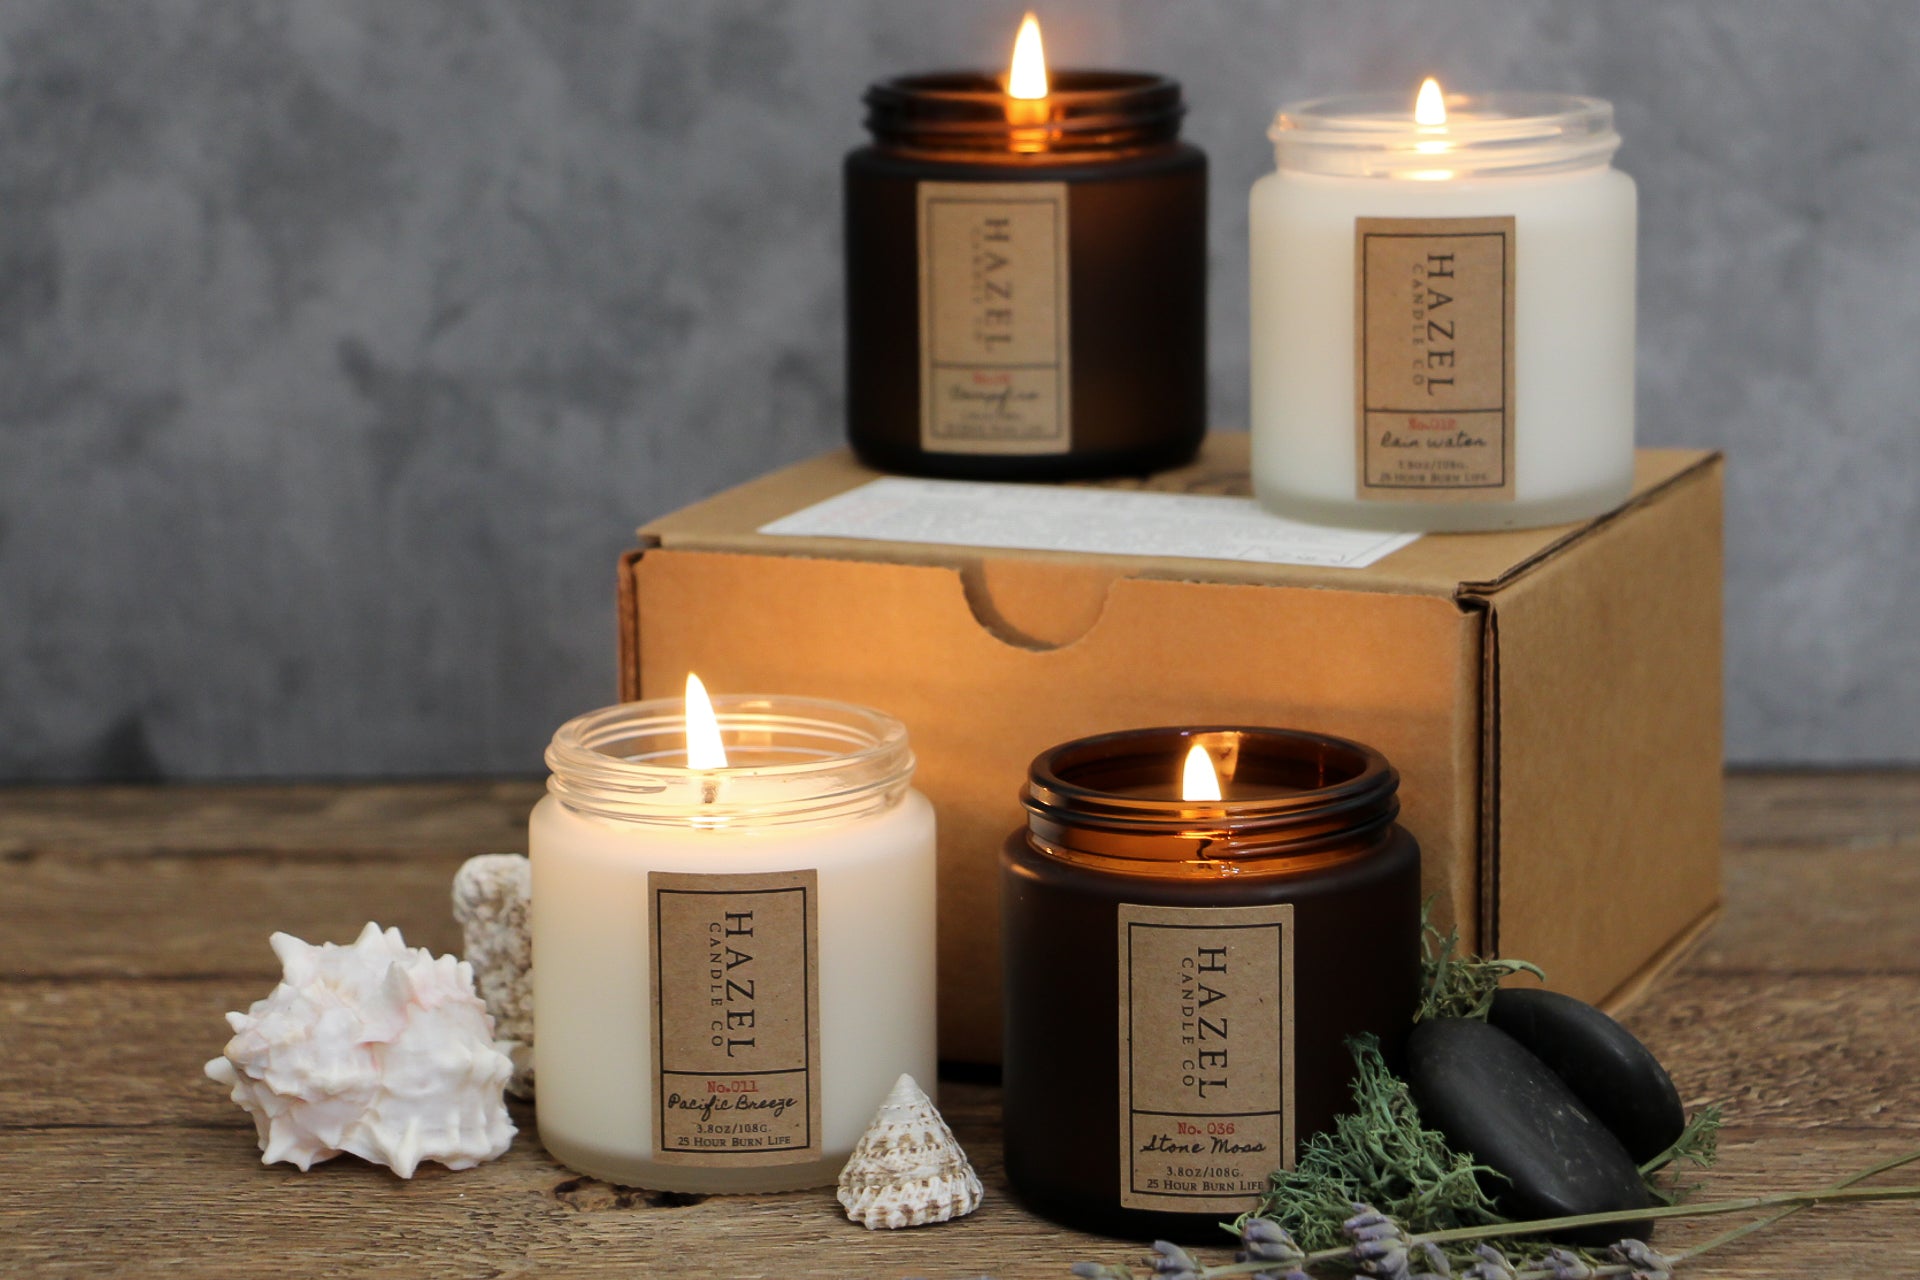 Best Sellers #2 Discovery Set (4 candles) – Hazel Candle Co.